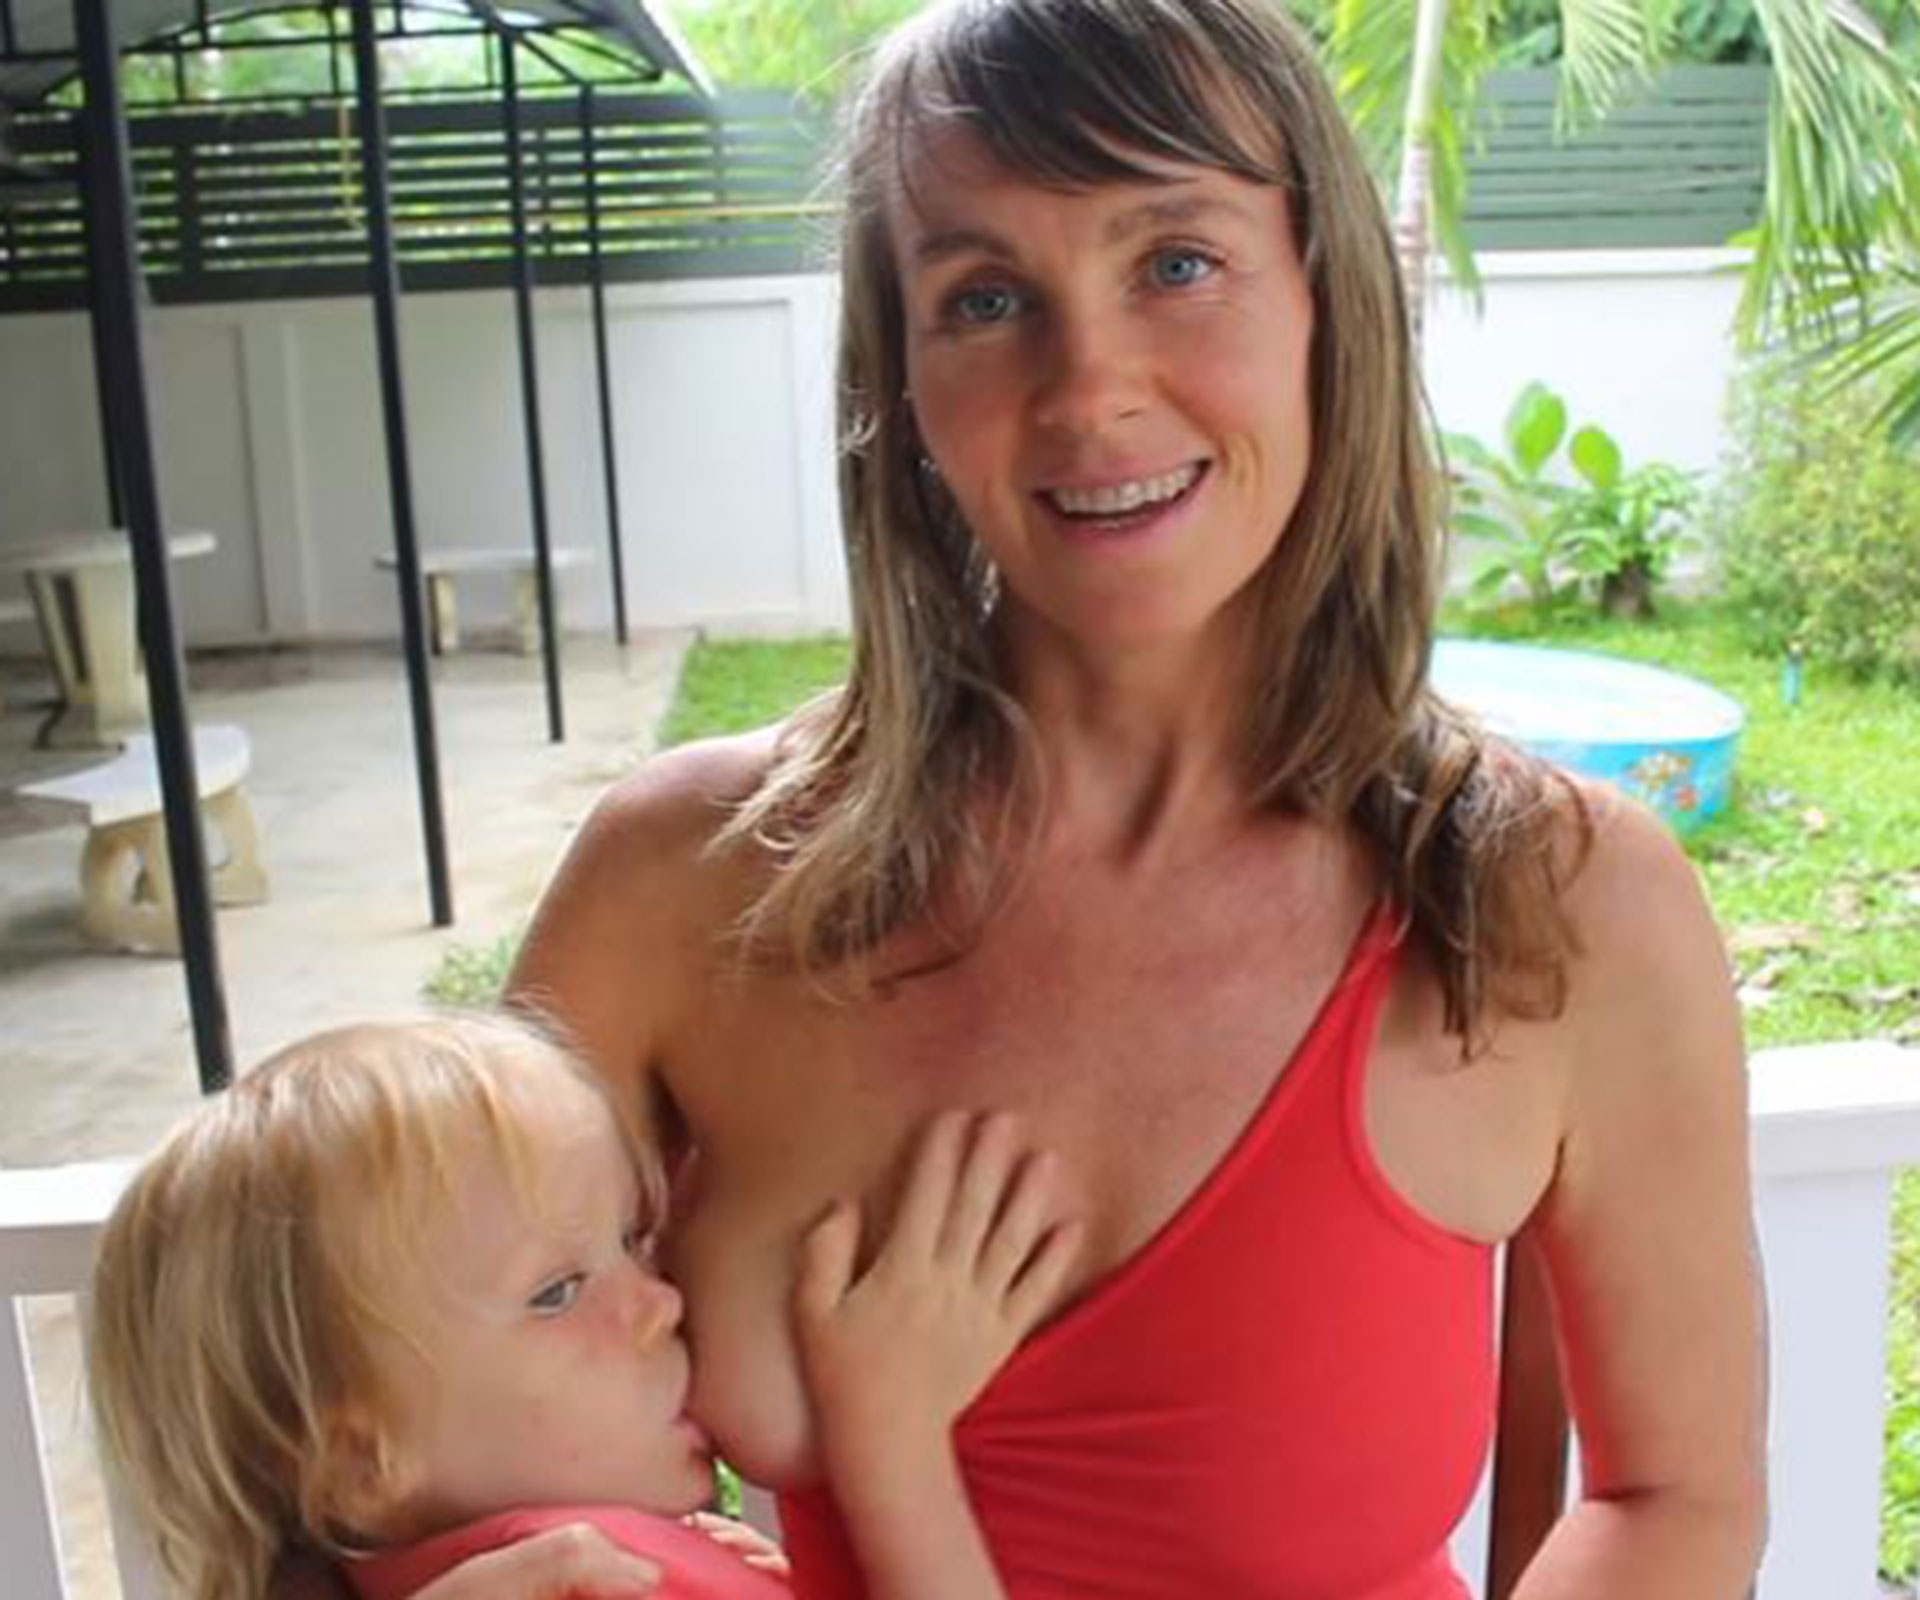 Mum posts videos breastfeeding her four-year-old to “normalise” it